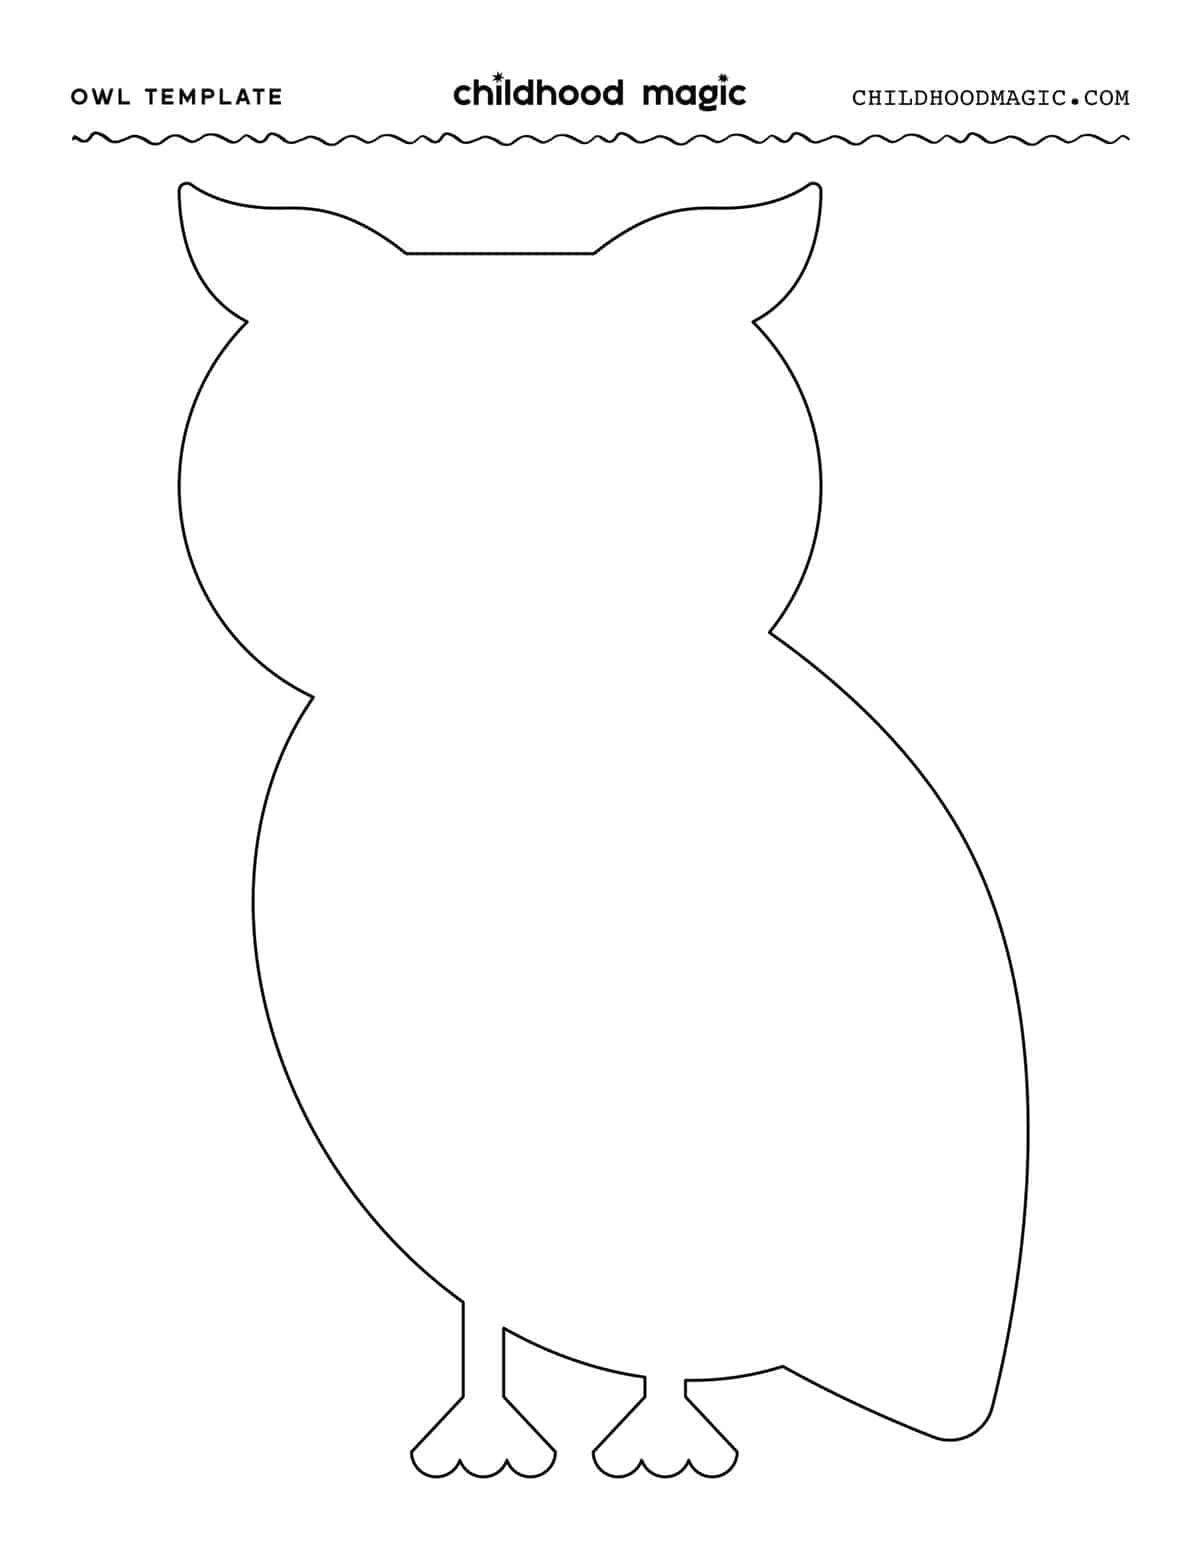 Owl Template - Childhood Magic for Free Owl Printables